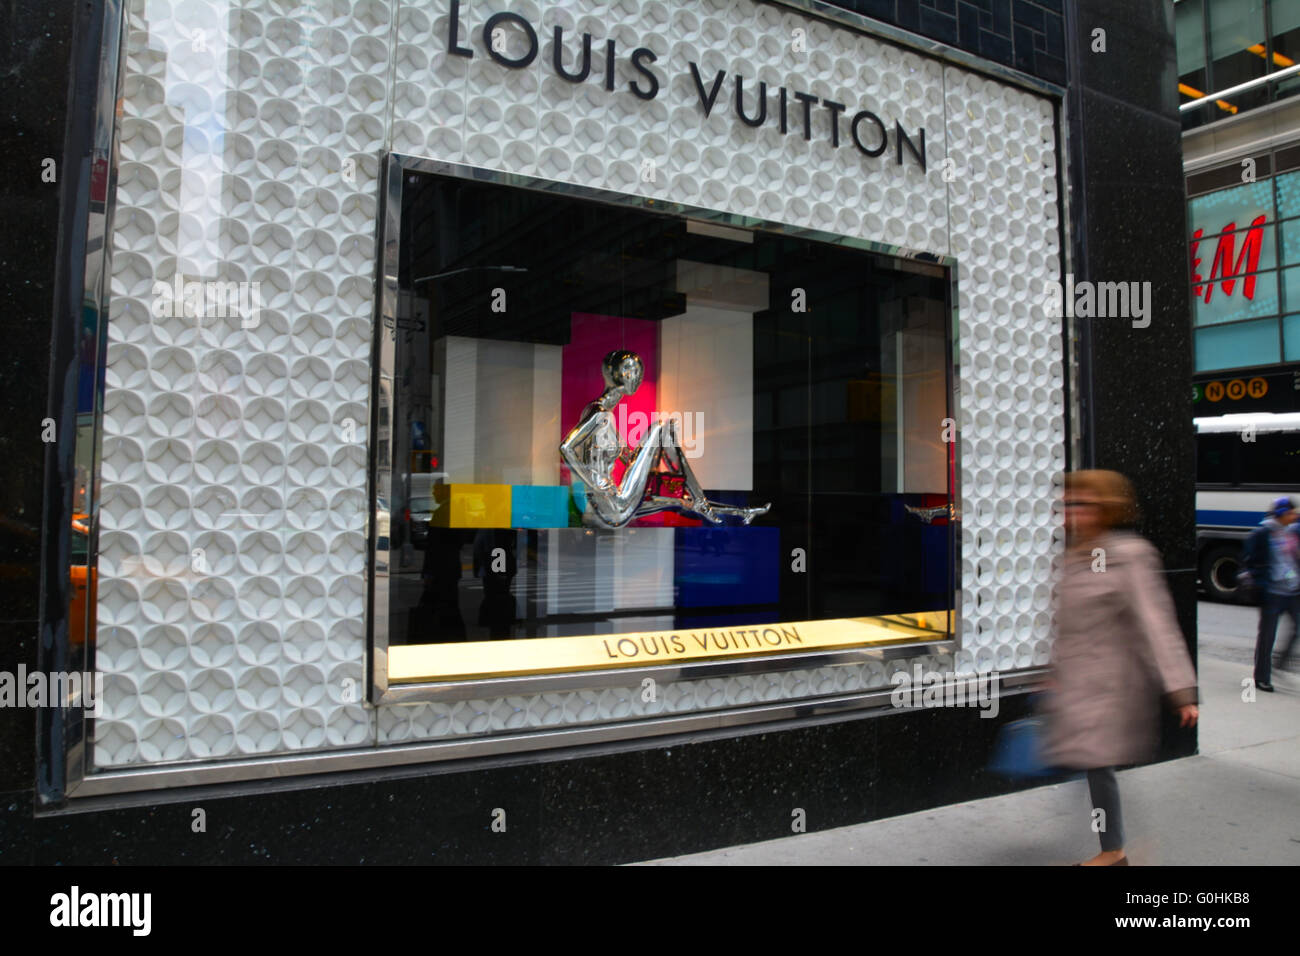 Louis Vuitton Shop In Bloomingdales Department Store In New York City Usa  Stock Photo - Download Image Now - iStock